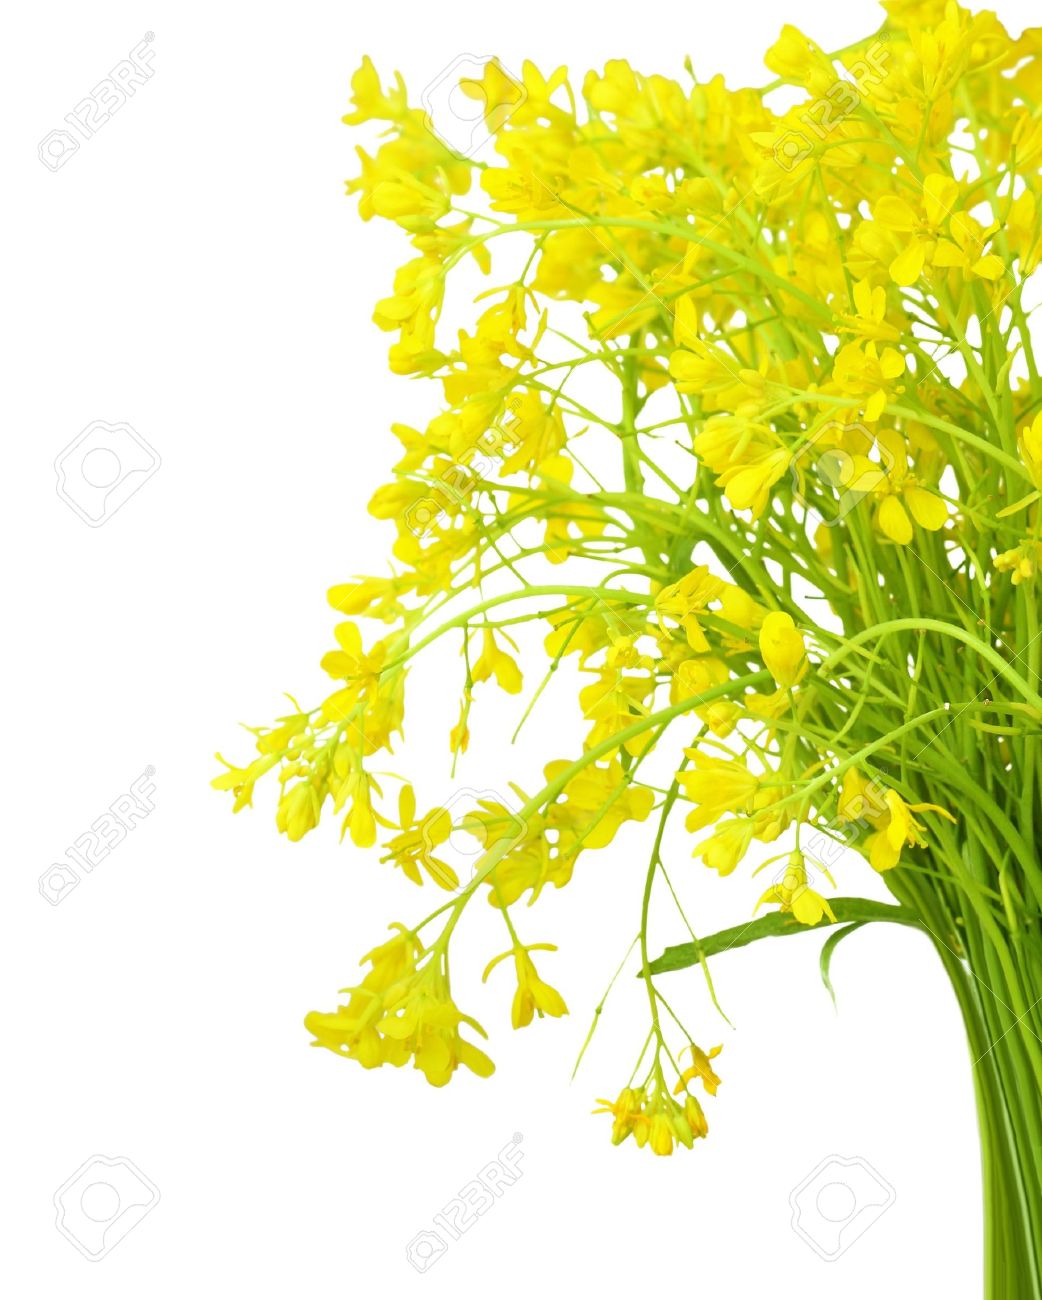 Bundle Of Rape Seed Flowers Isolated On White Stock Photo, Picture.